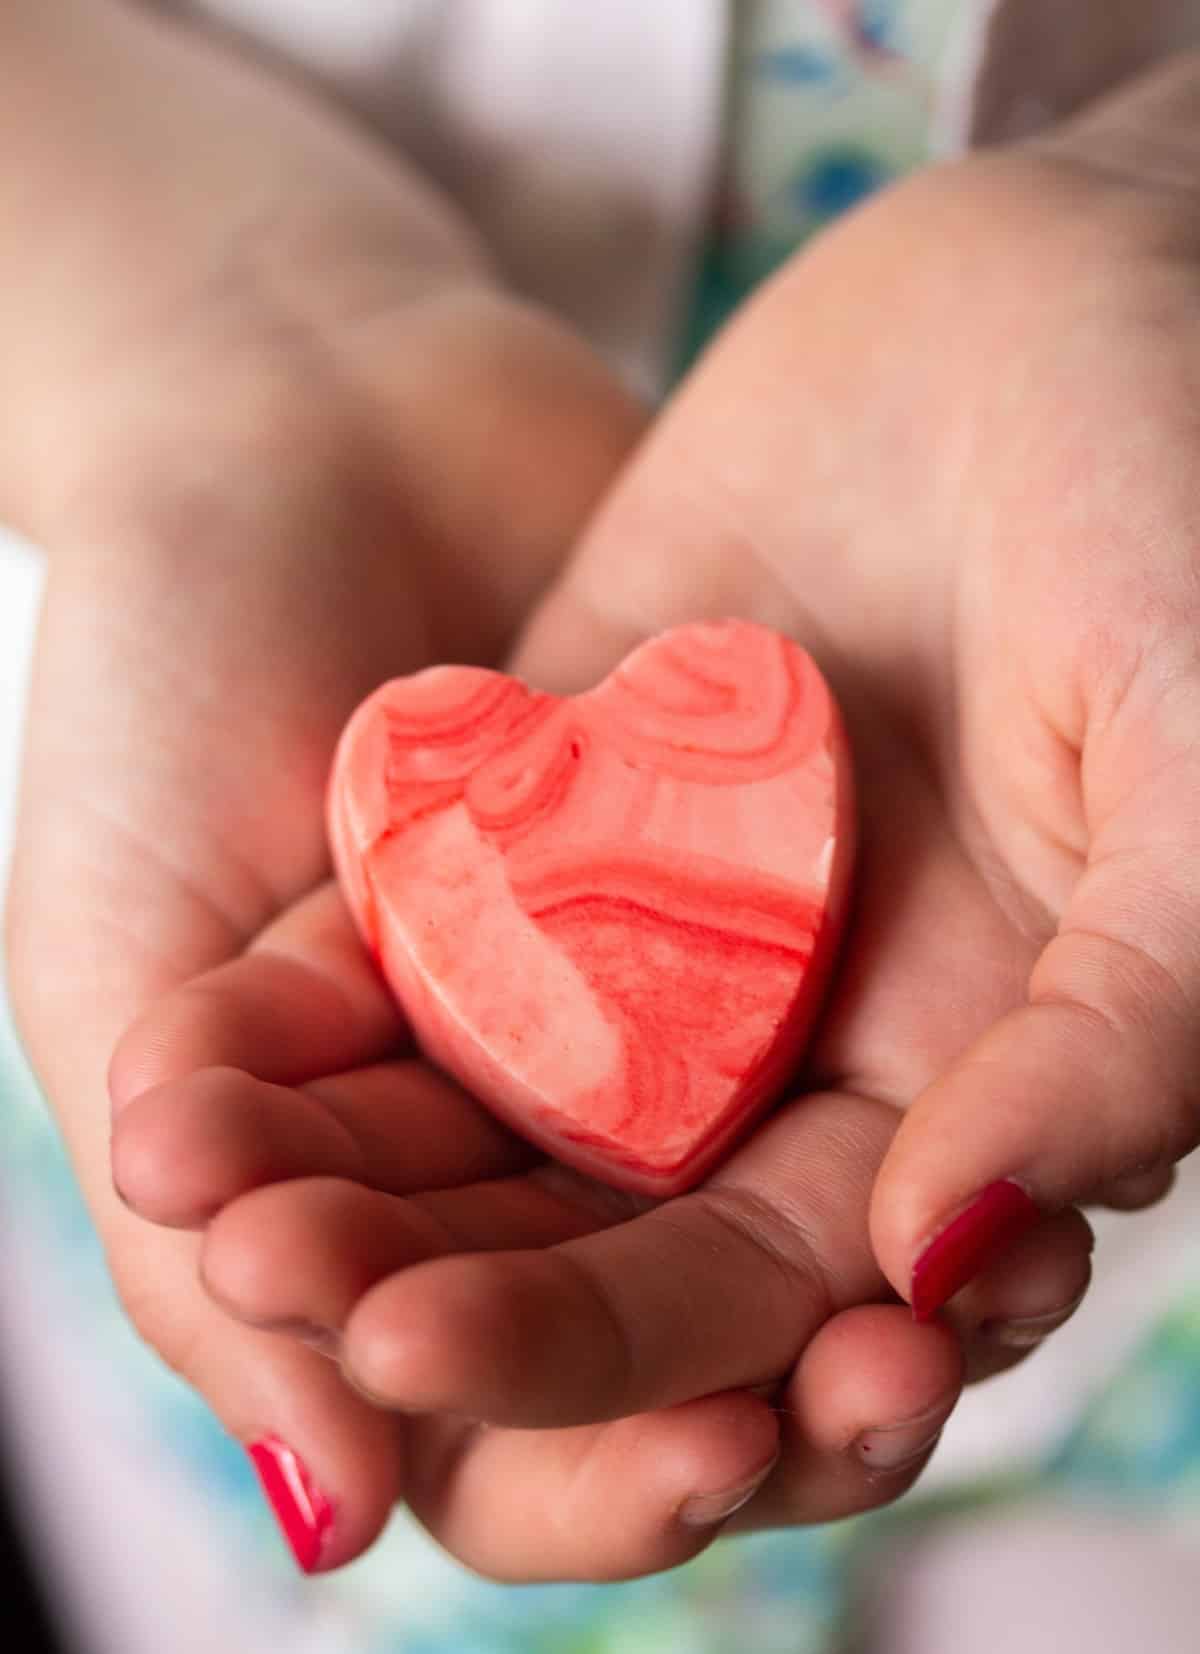 girl's hands holding a heart-shaped piece of pink fudge.